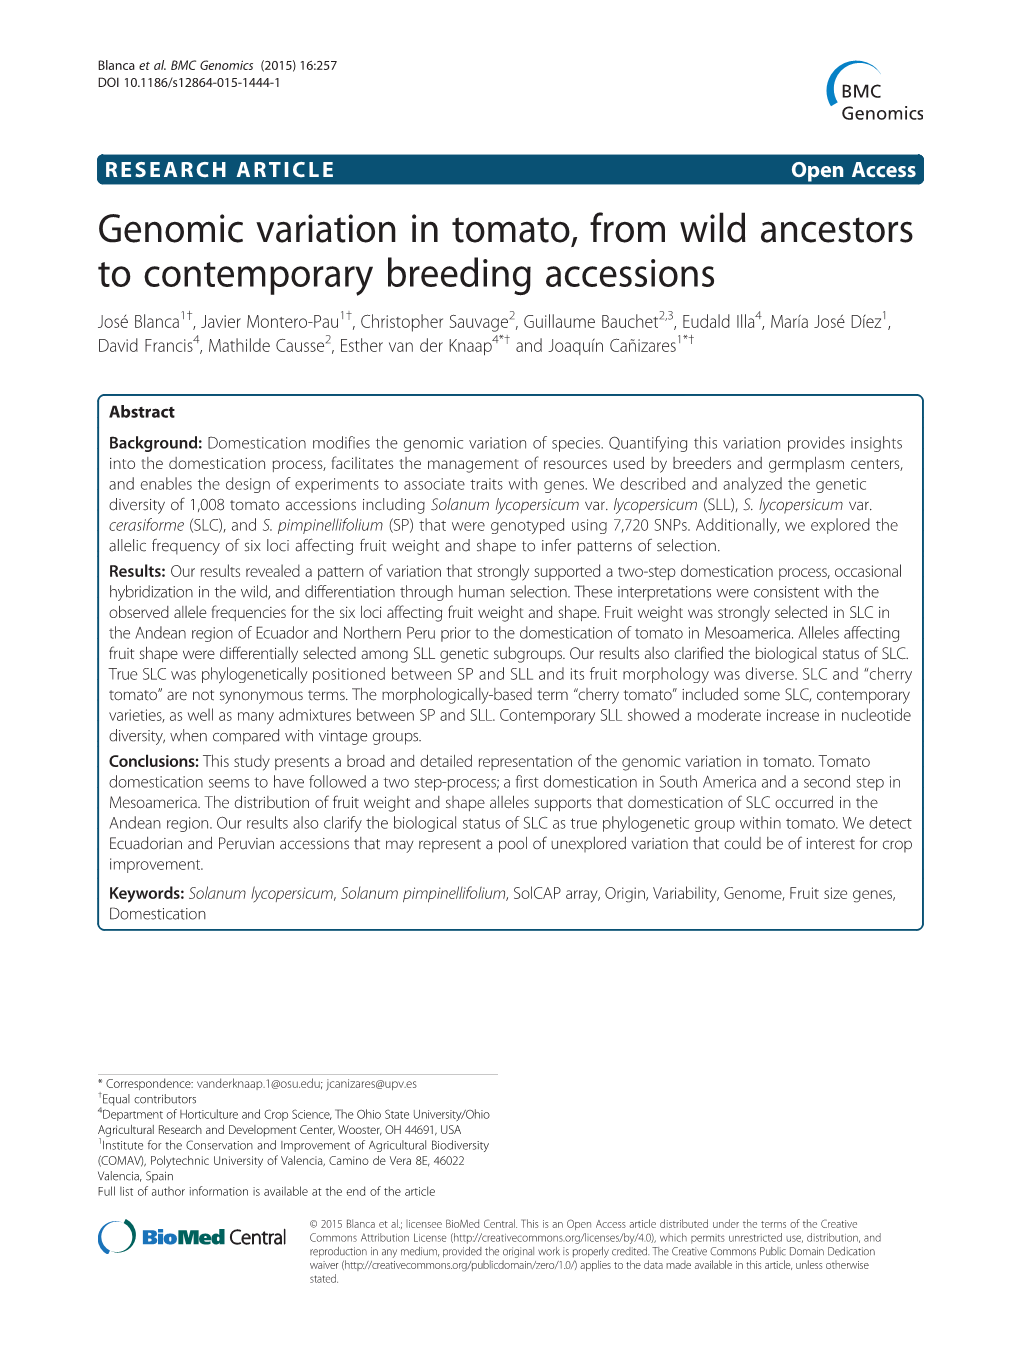 Genomic Variation in Tomato, from Wild Ancestors to Contemporary